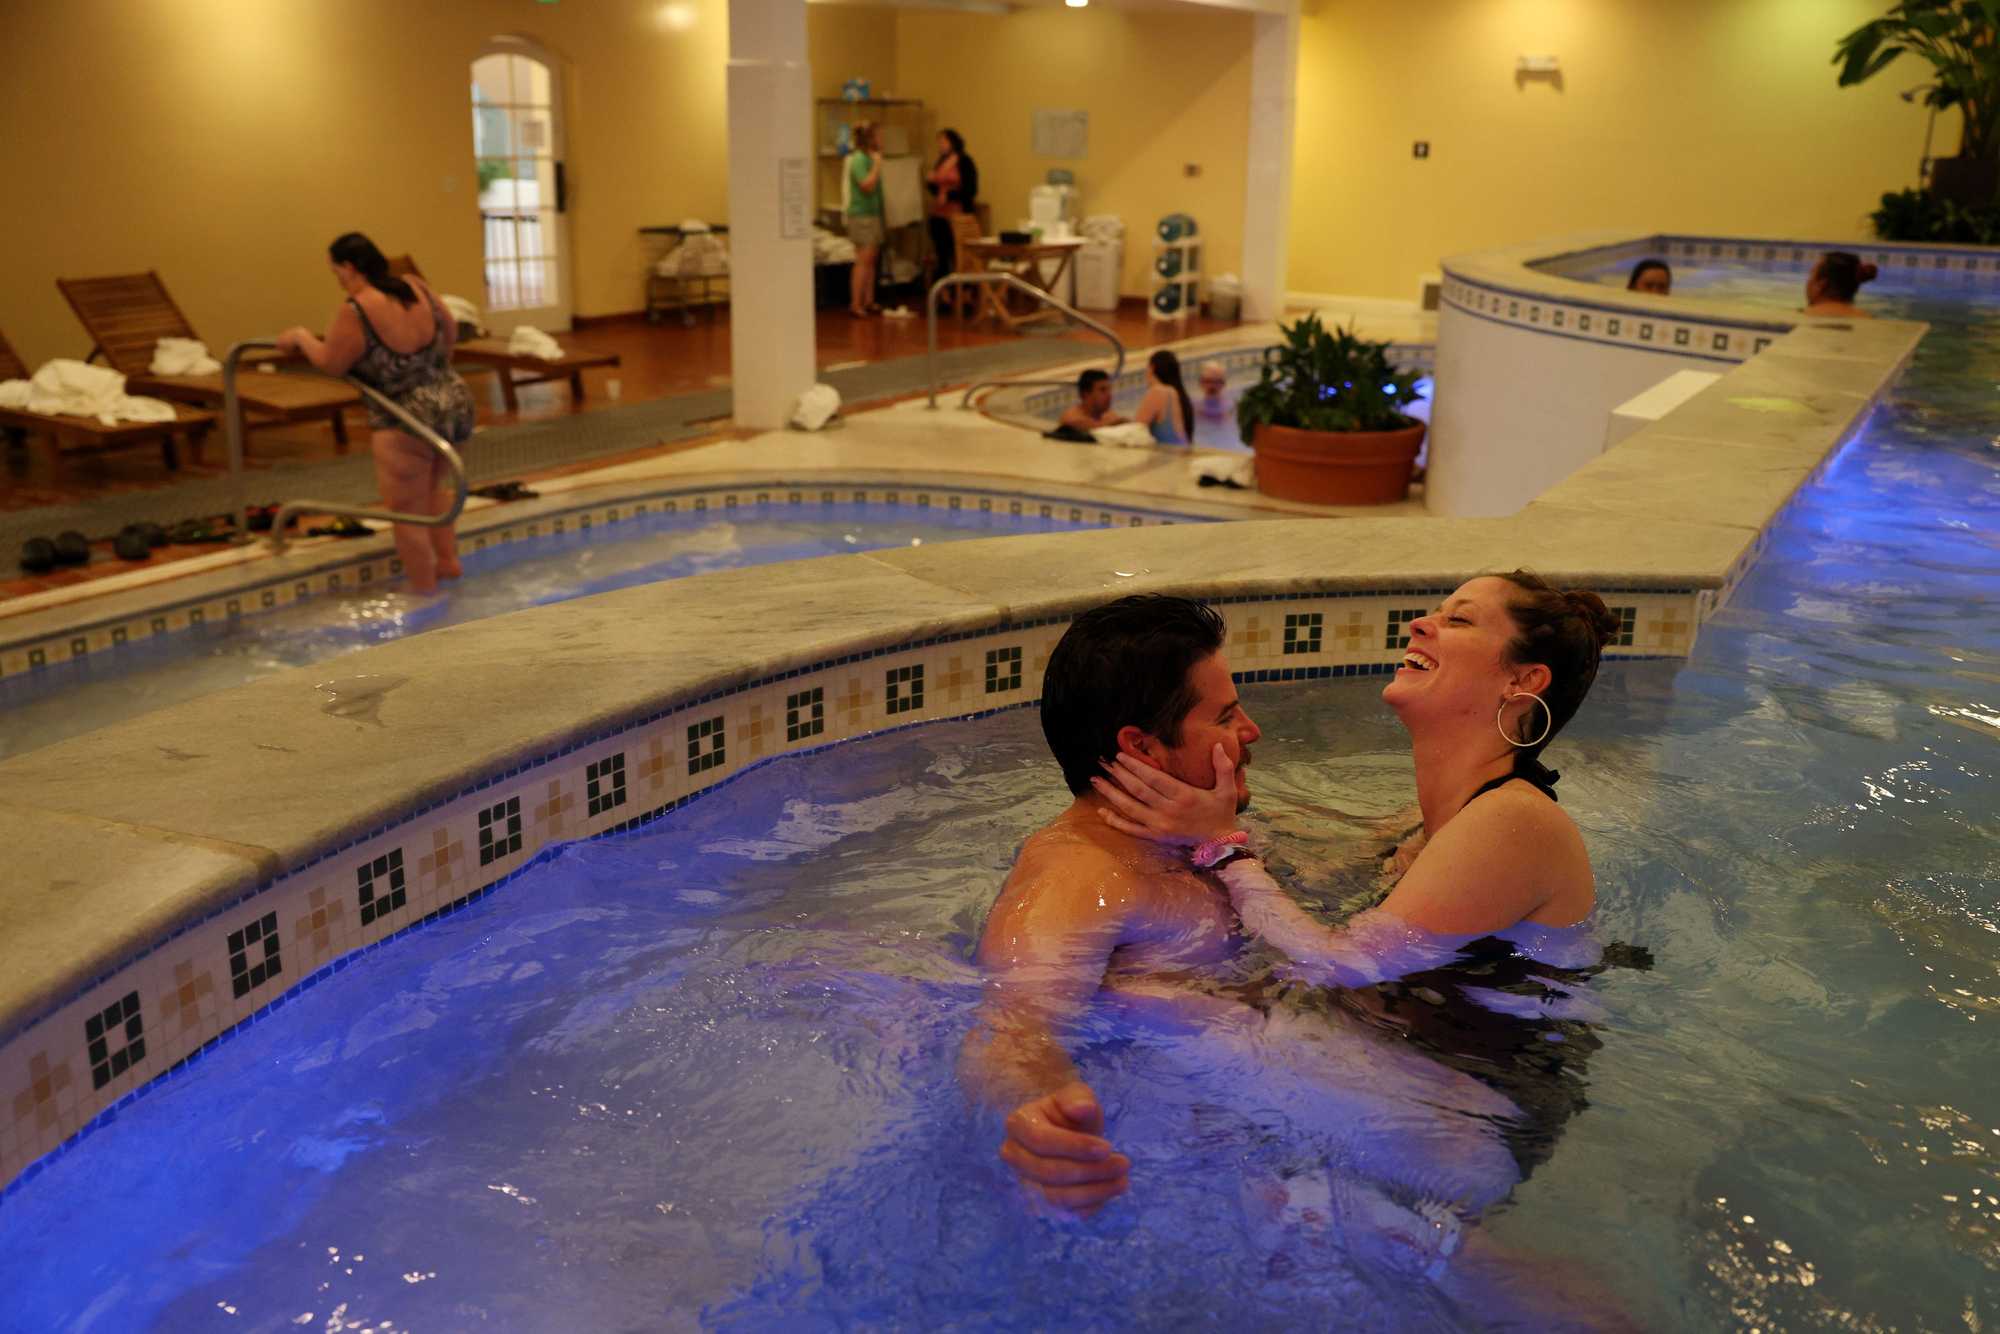 Brandon Fears and Grace Hutchison soaked at the Quapaw Baths & Spa.